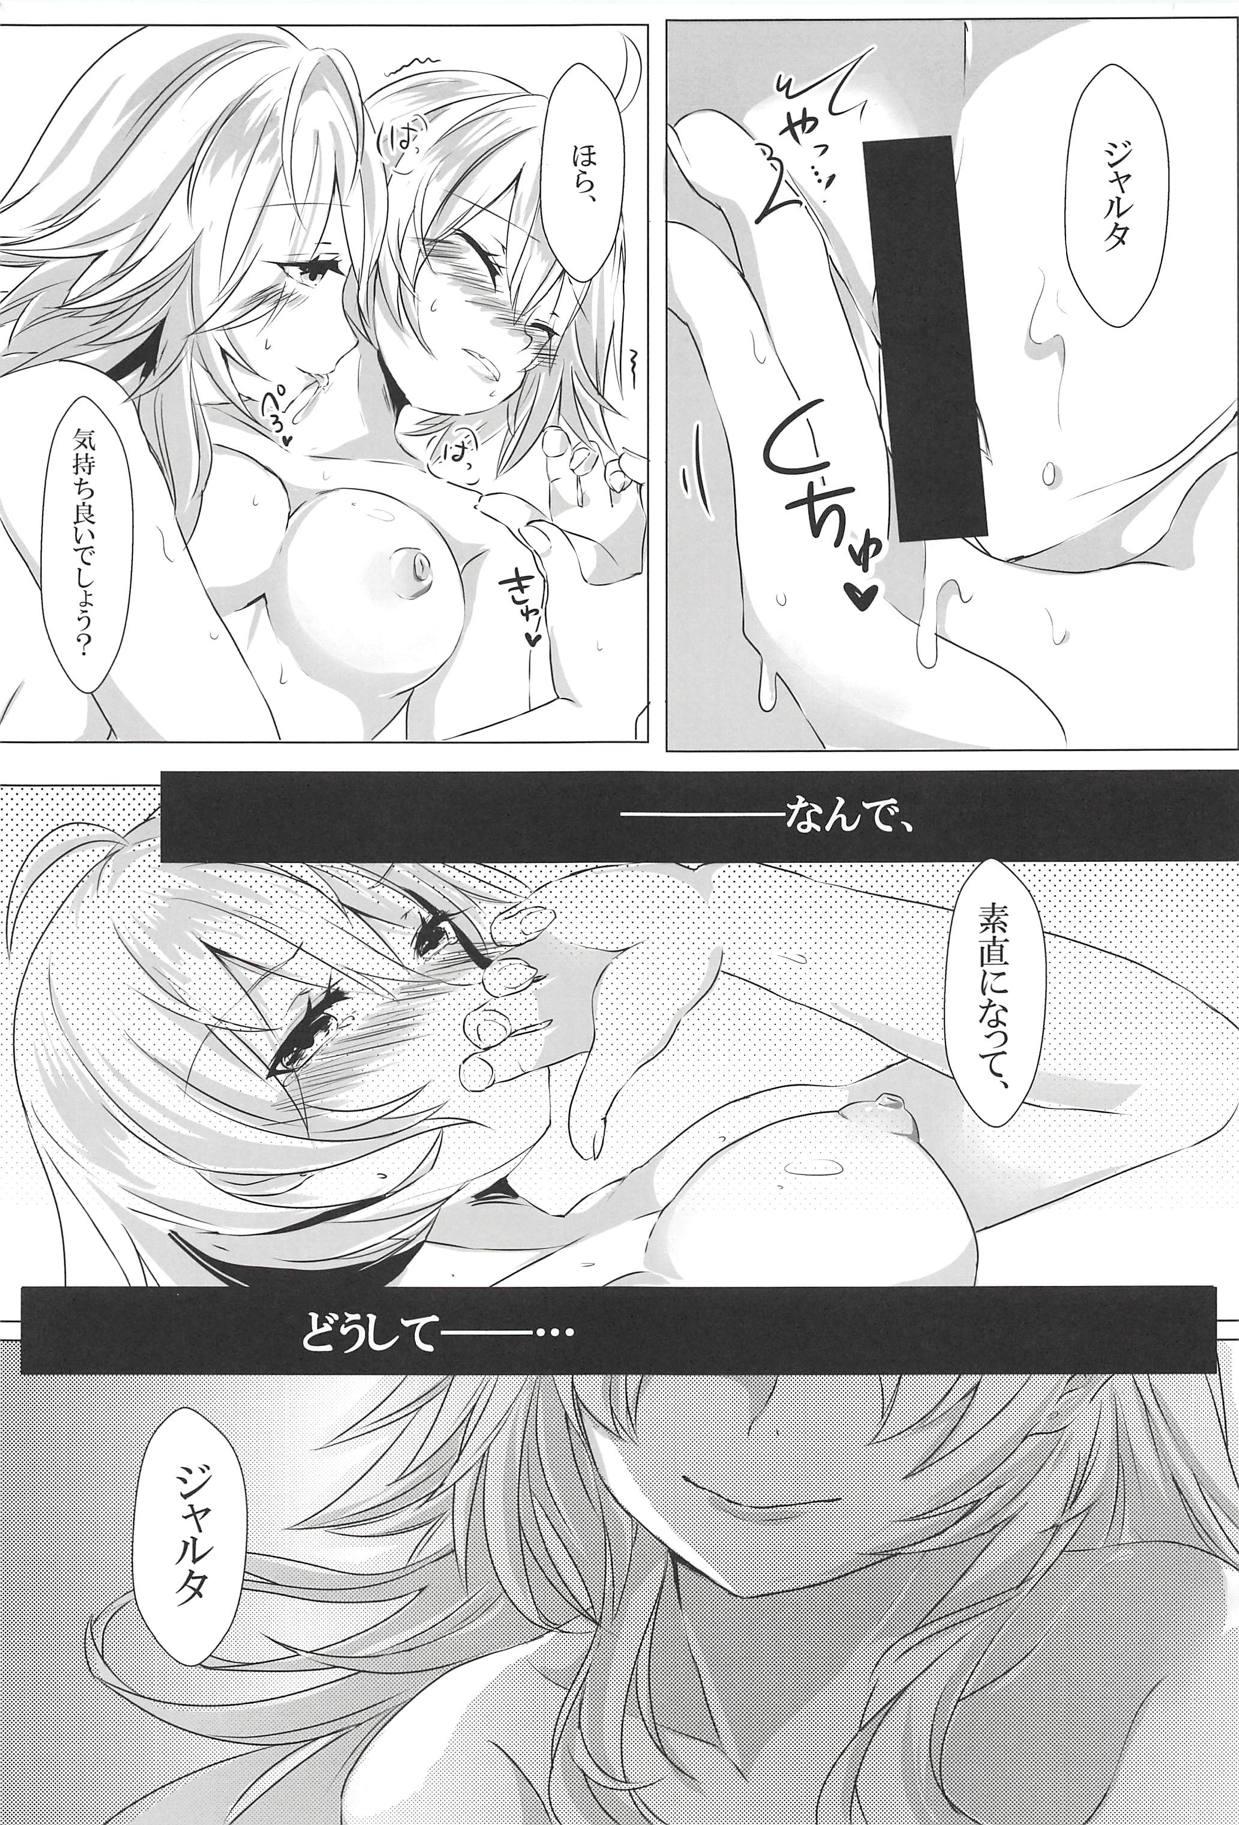 Ano TWIN SCANDAL - Fate grand order Screaming - Page 6